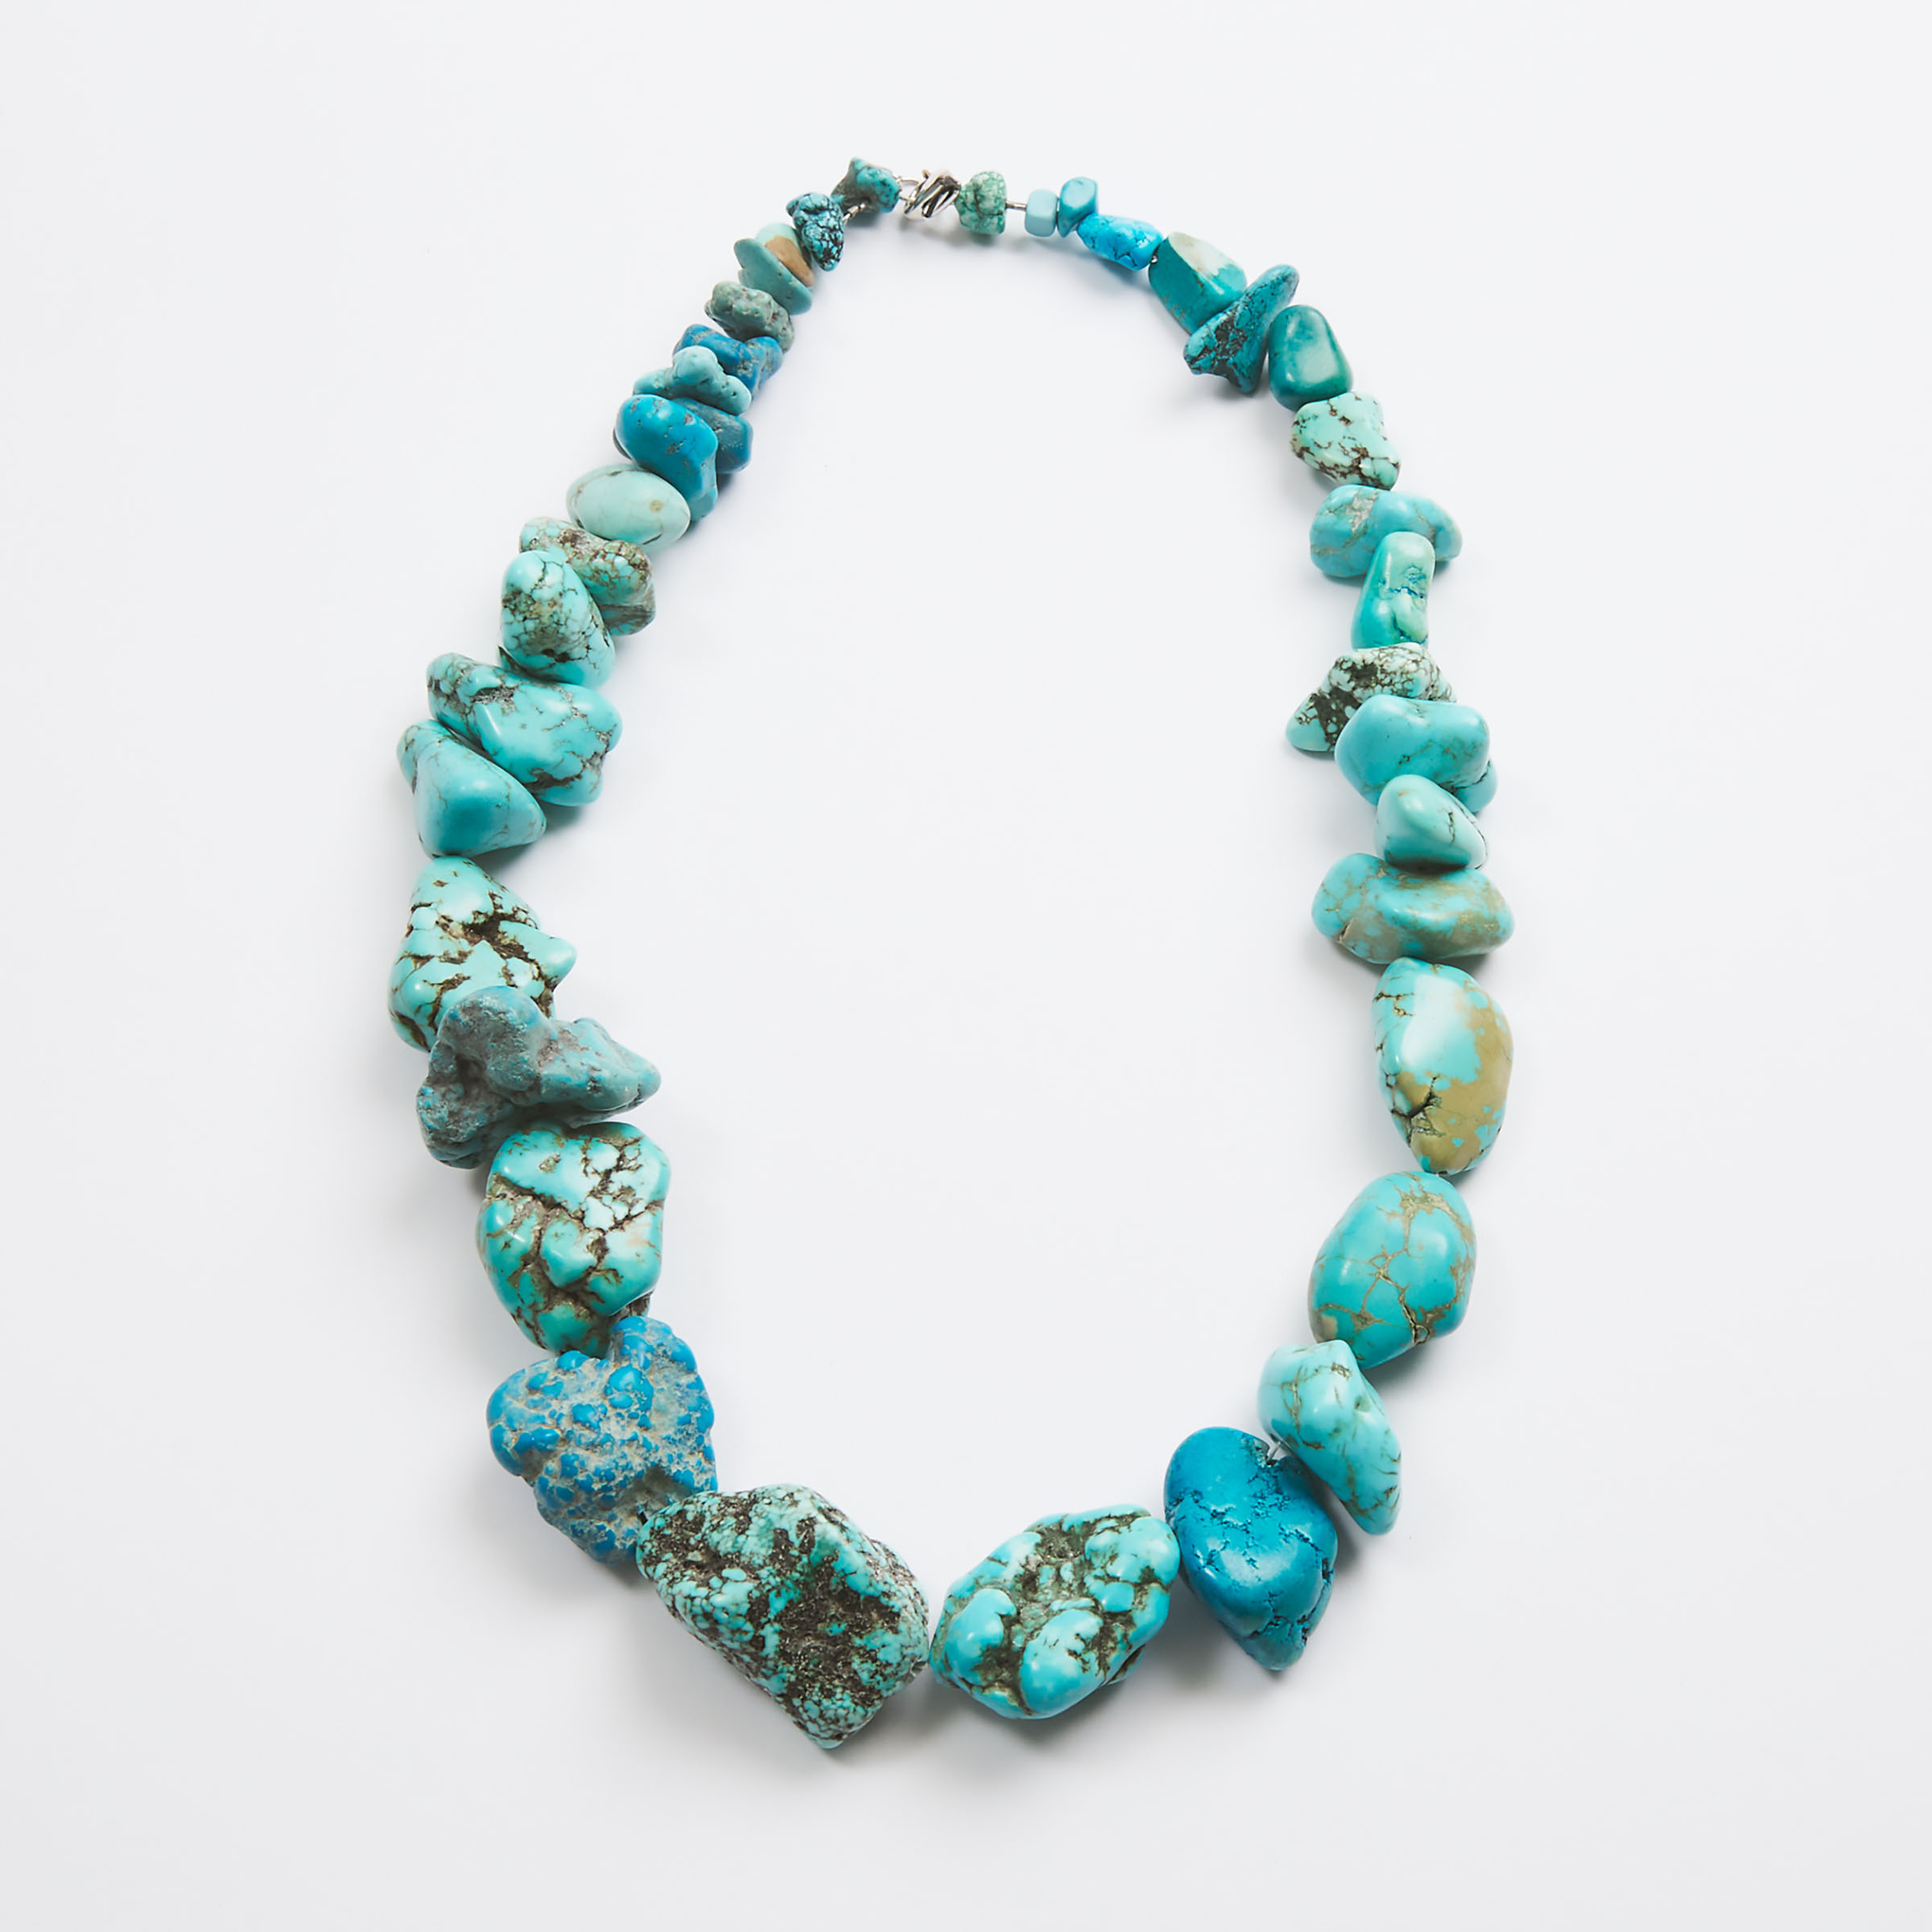 A Necklace of Natural Turquoise Beads 